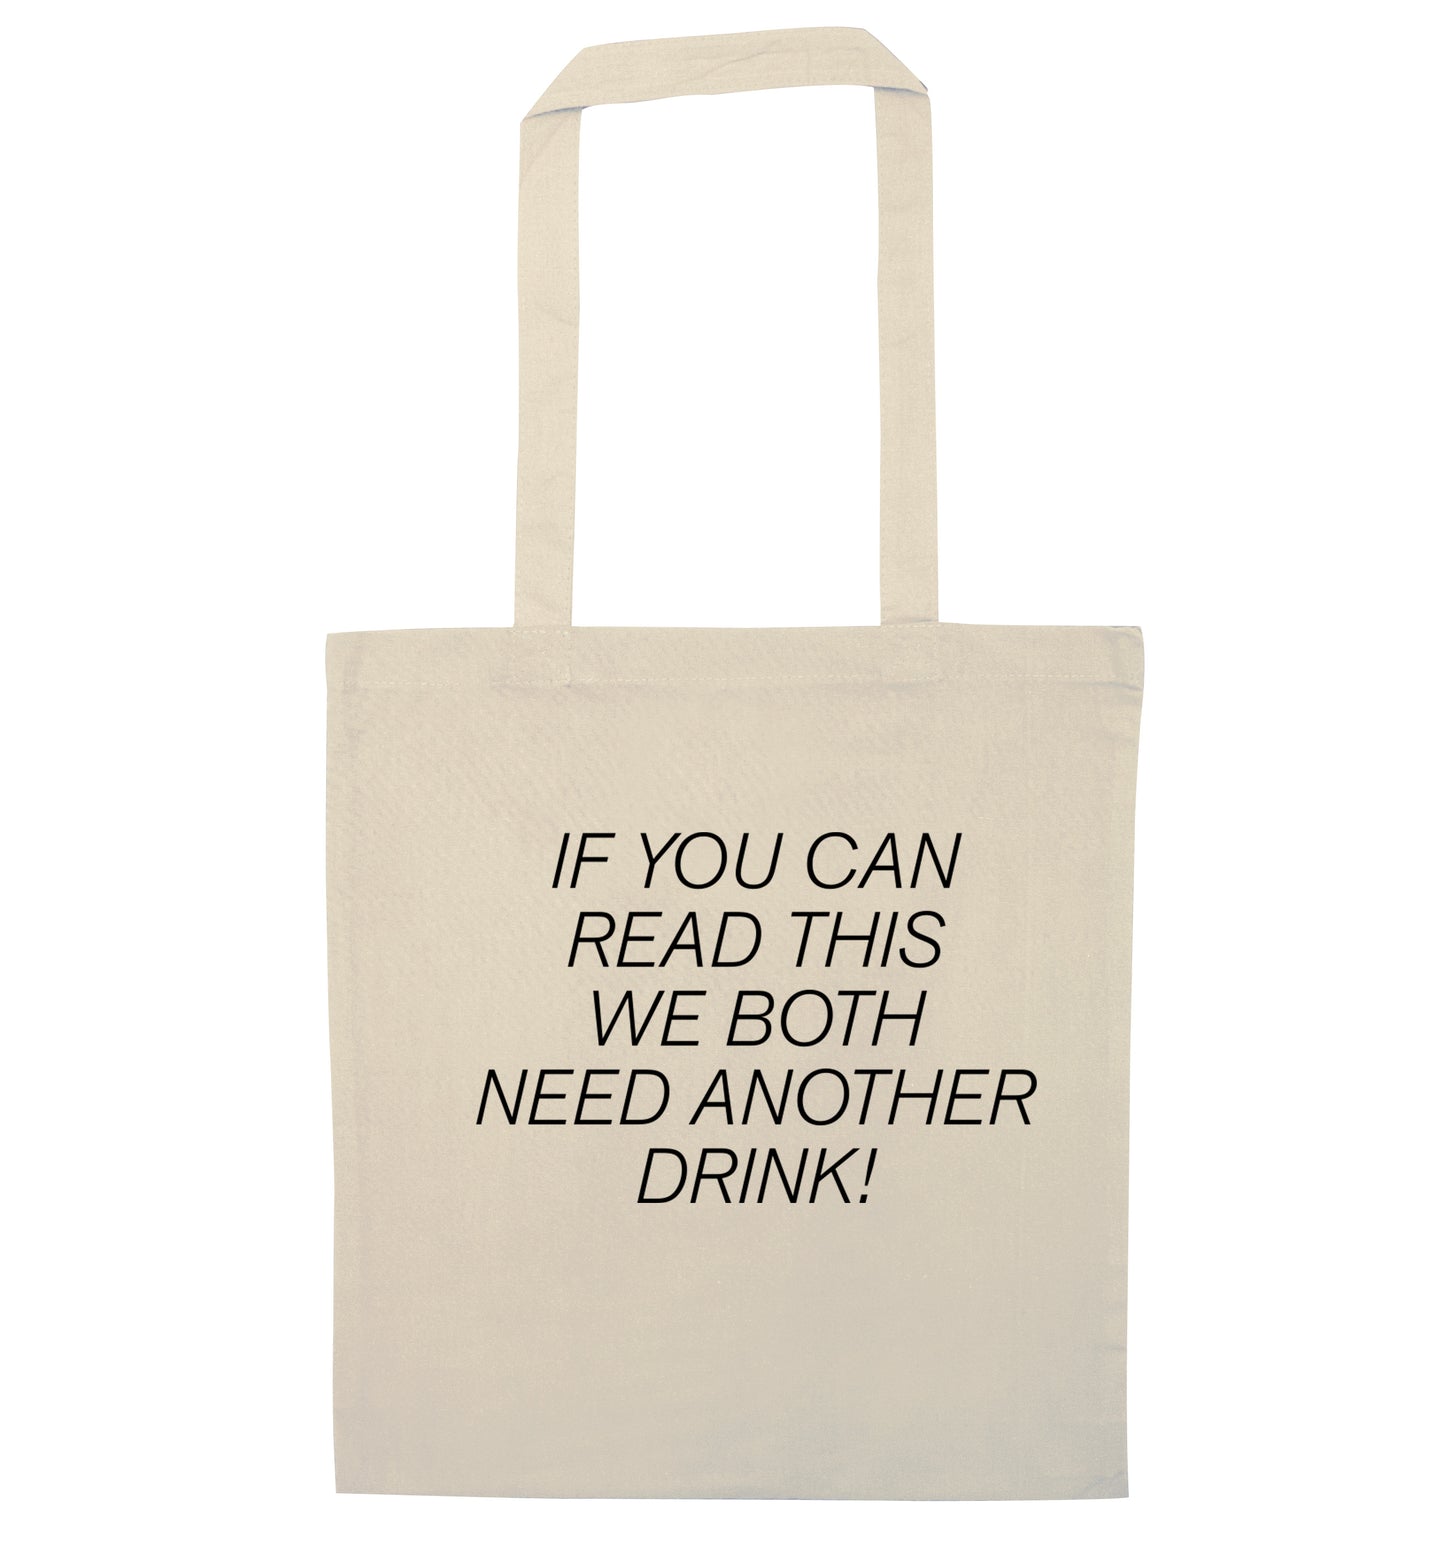 If you can read this we both need another drink! natural tote bag